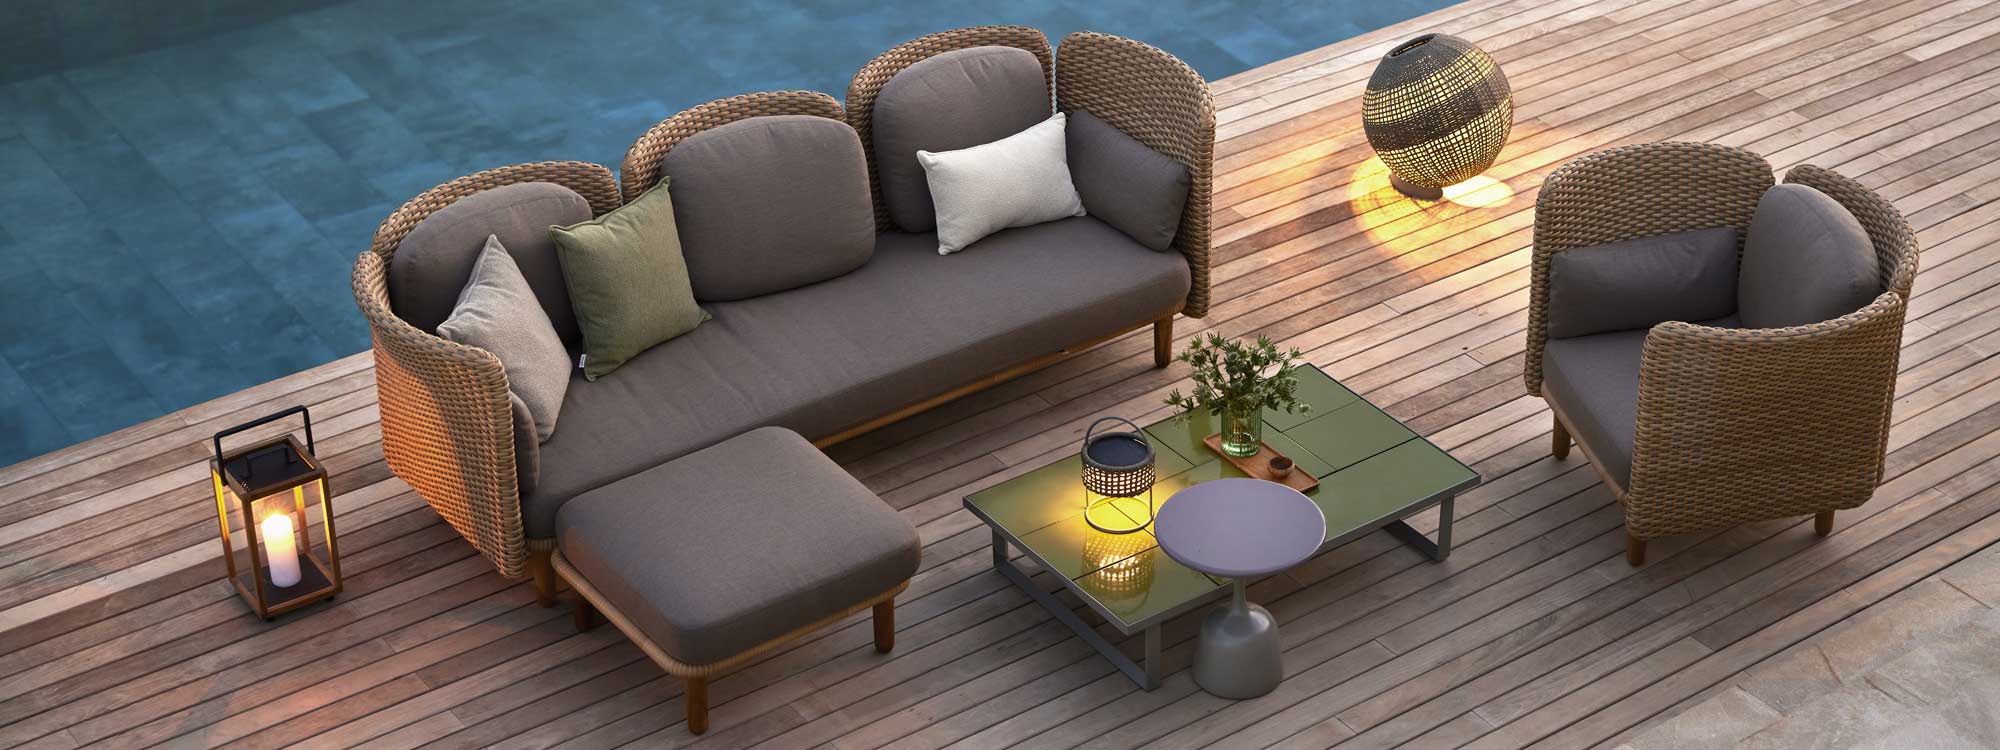 Image of aerial view of Cane-line Arch 3 seater modern rattan sofa, footrest and lounge chair on trendy poolside